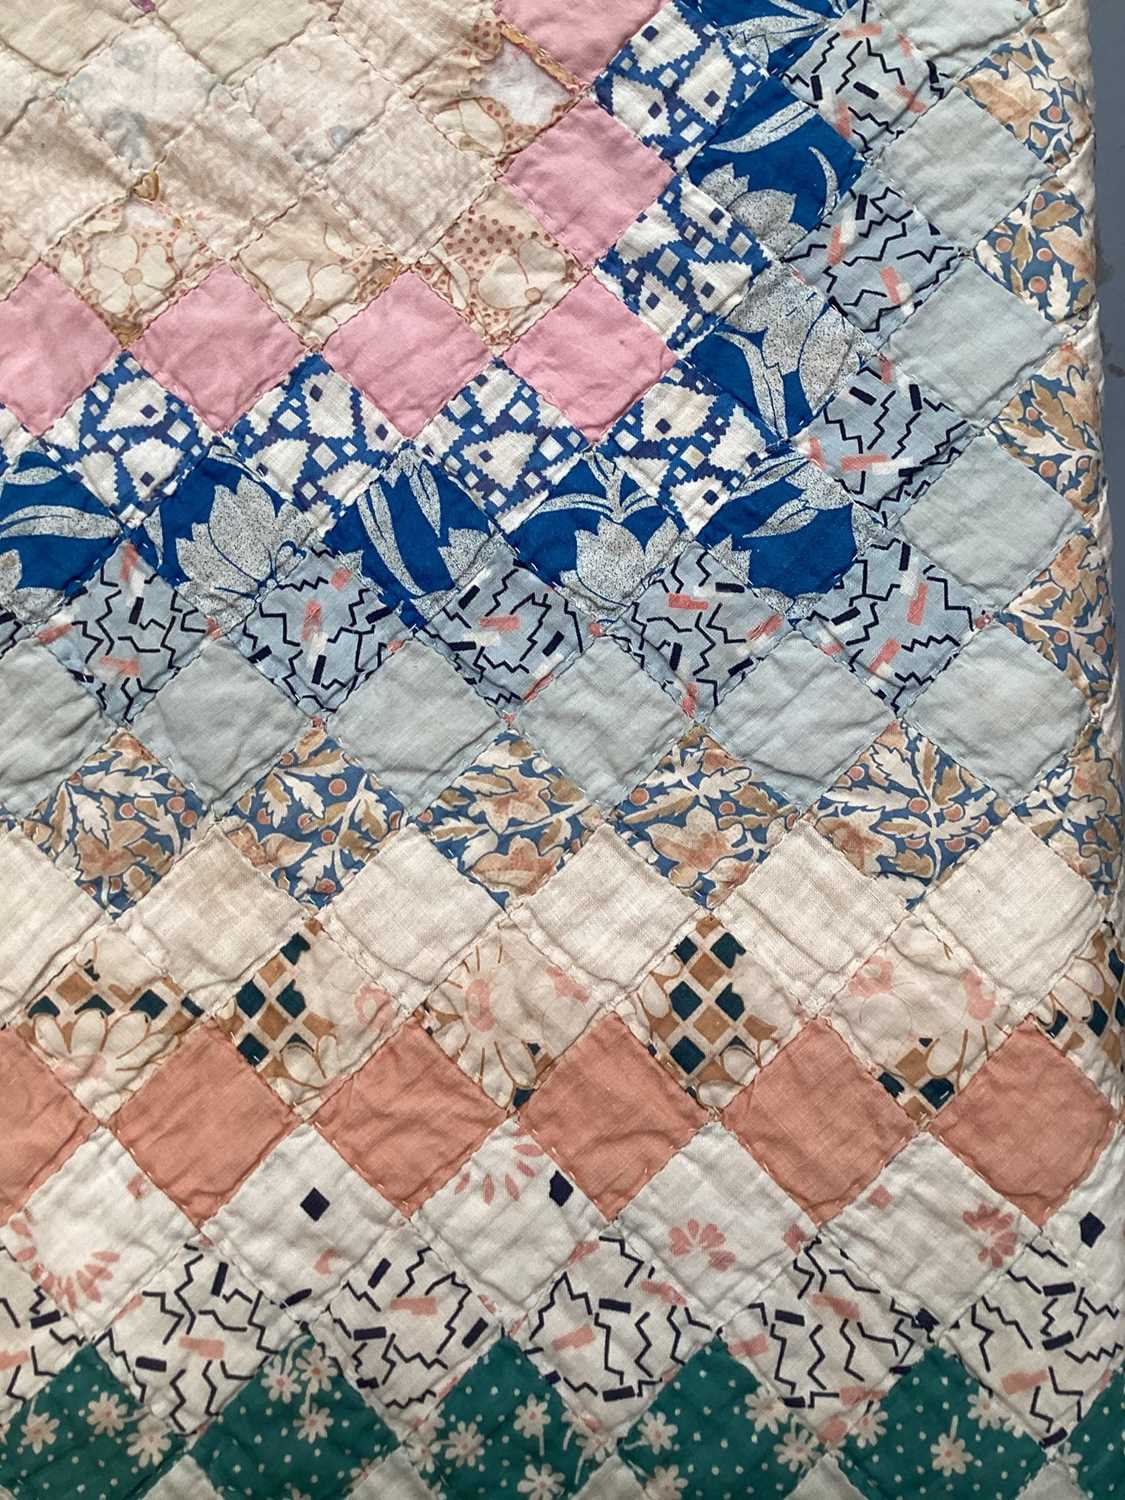 Cotton patchwork quilt 200 x 190 cms approximately c.1930's. - Image 12 of 12